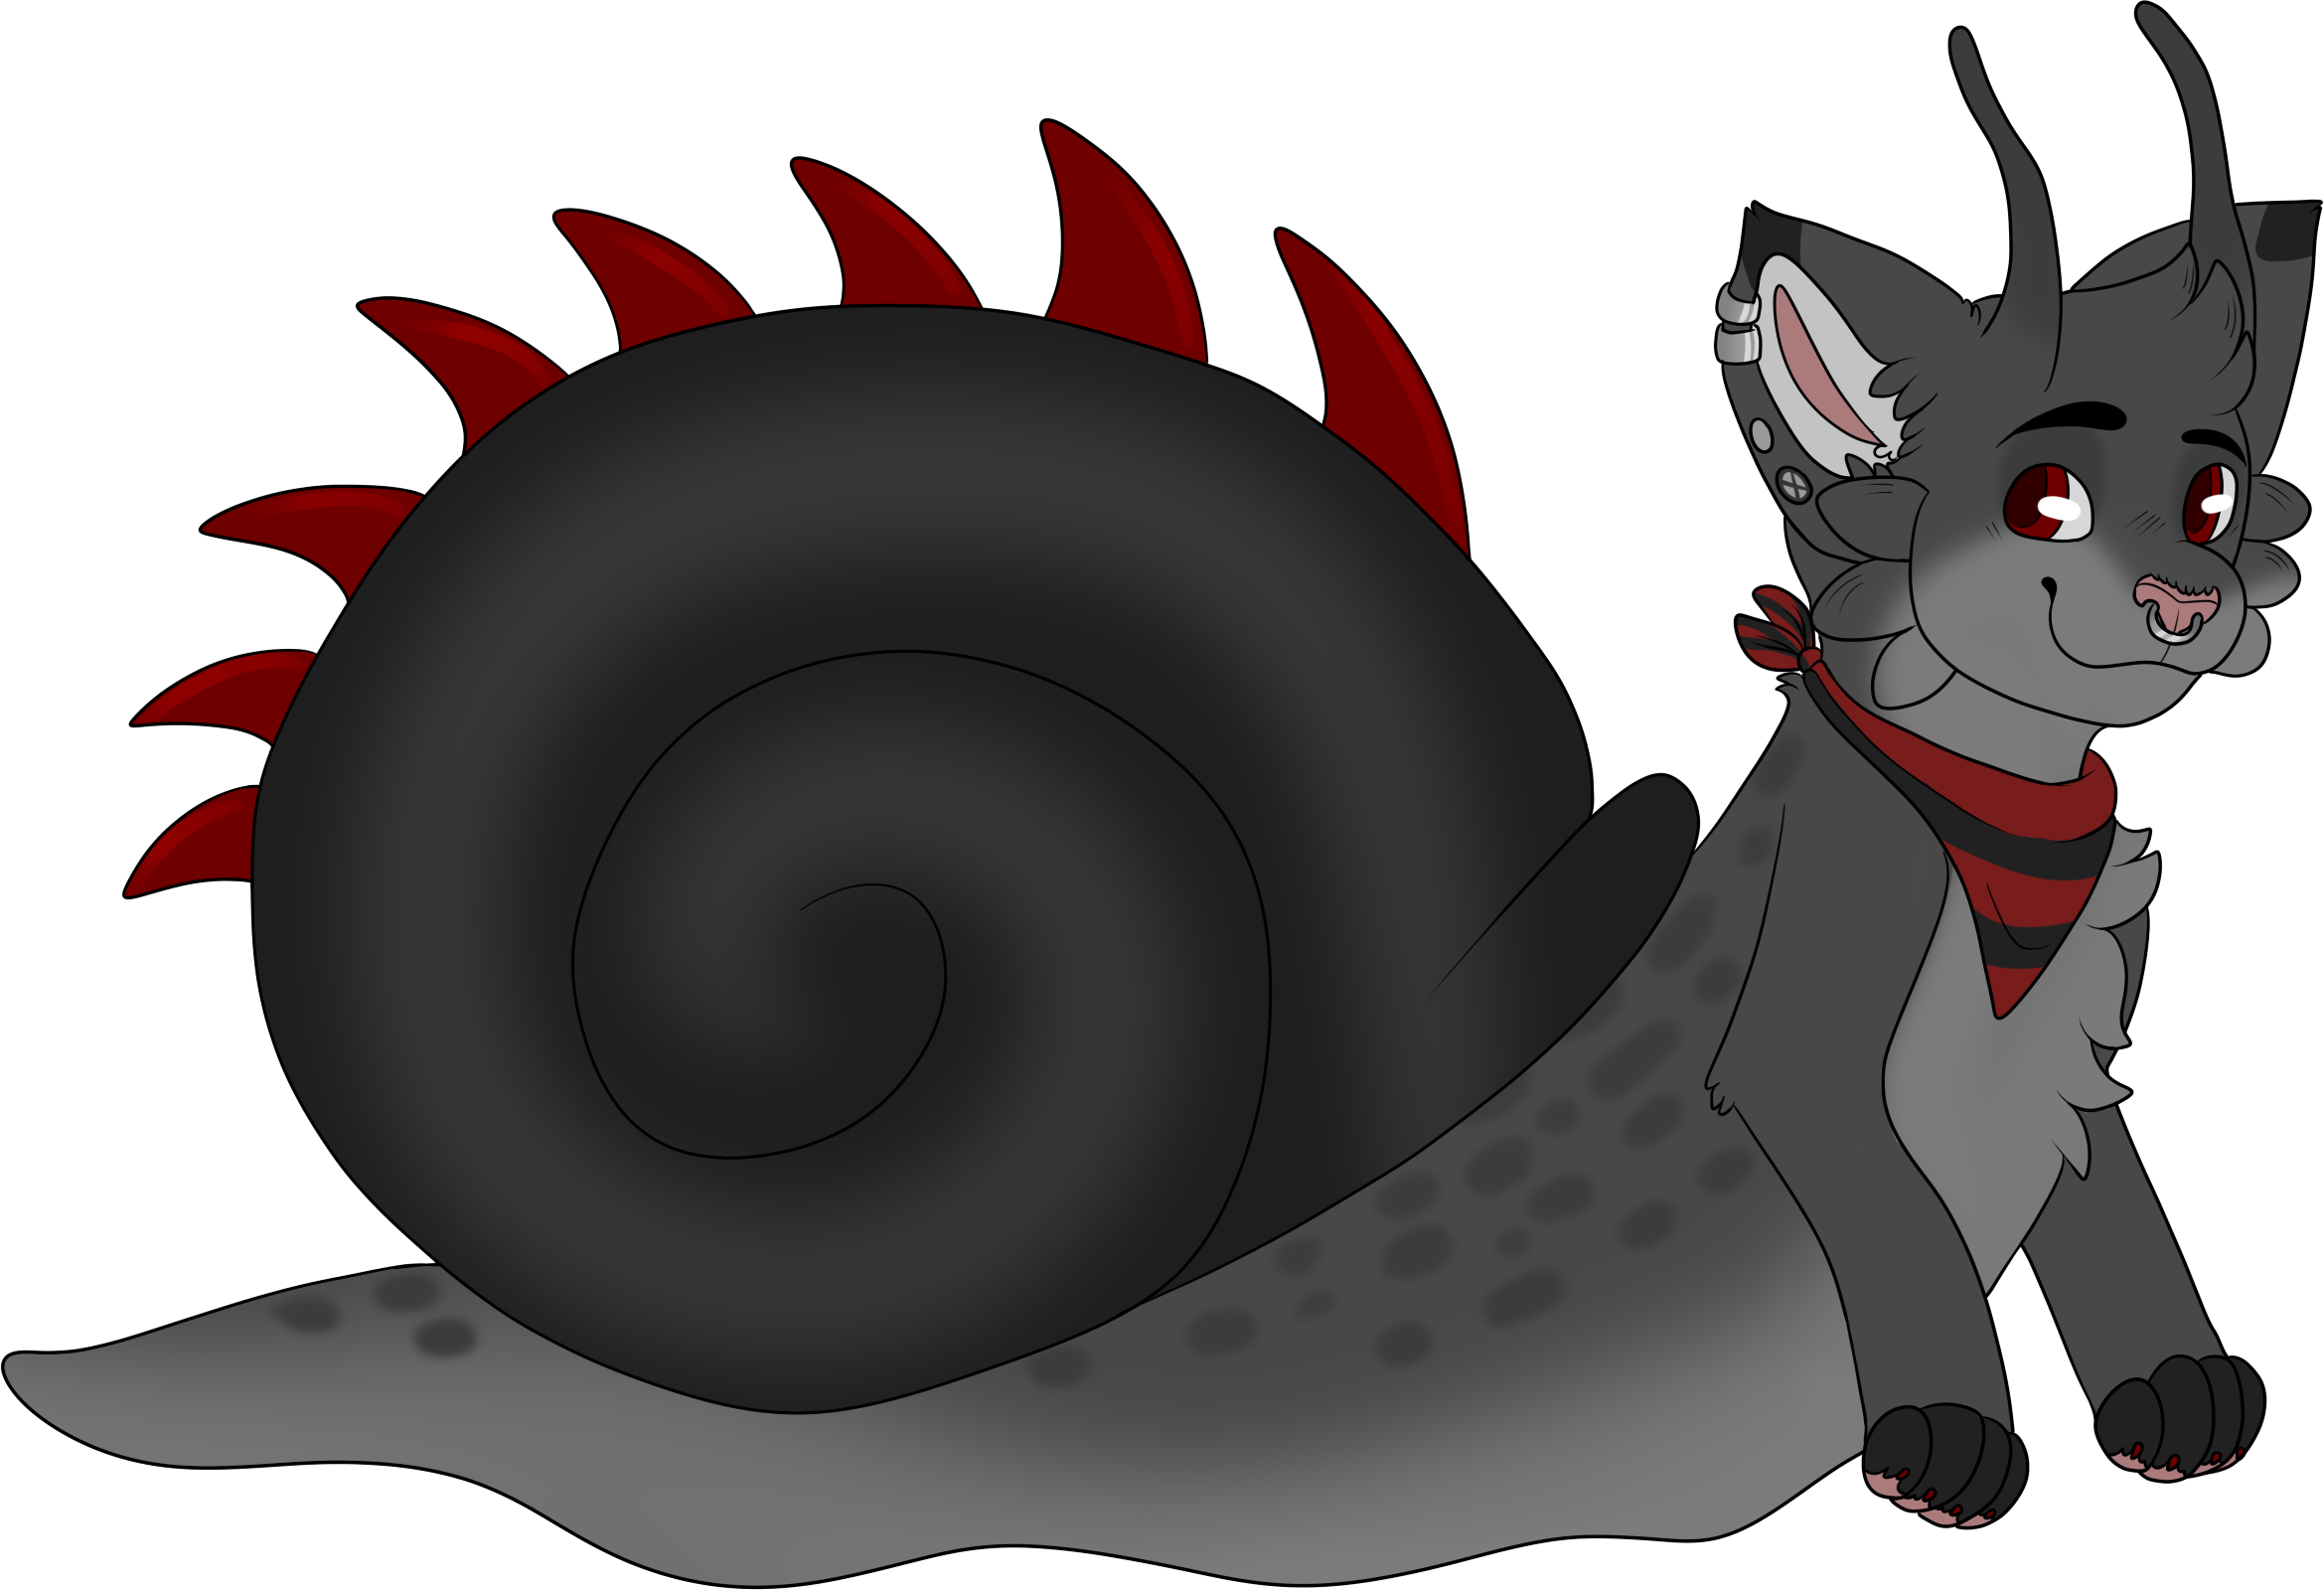 A mostly black Snailcat with a black snail shell with dark red spikes